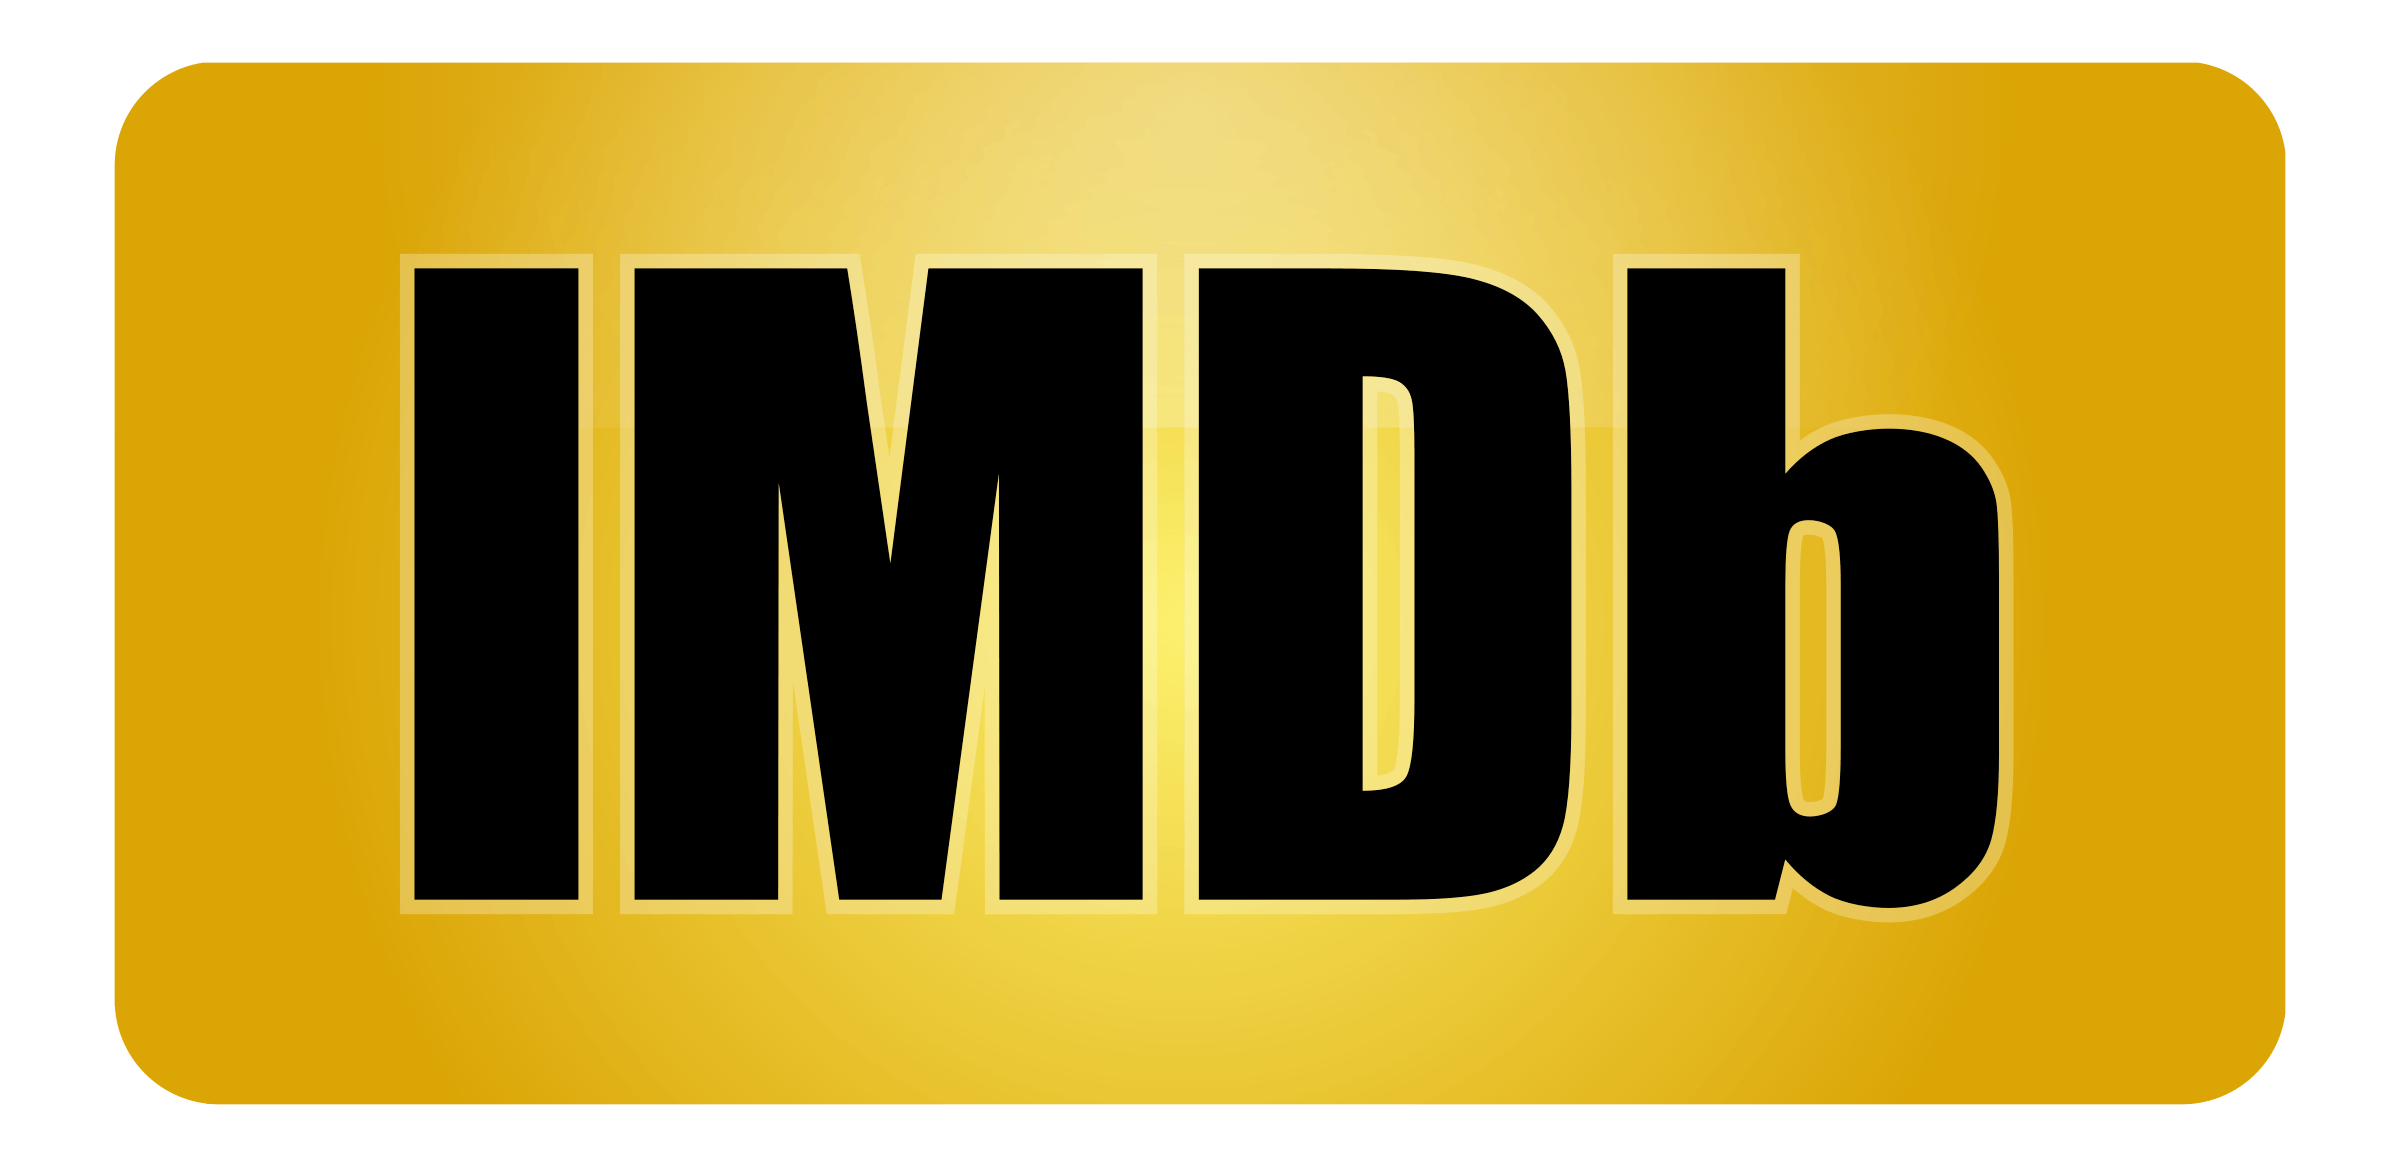 https://ignite-pictures.com/wp-content/uploads/2018/05/imdb-2.png